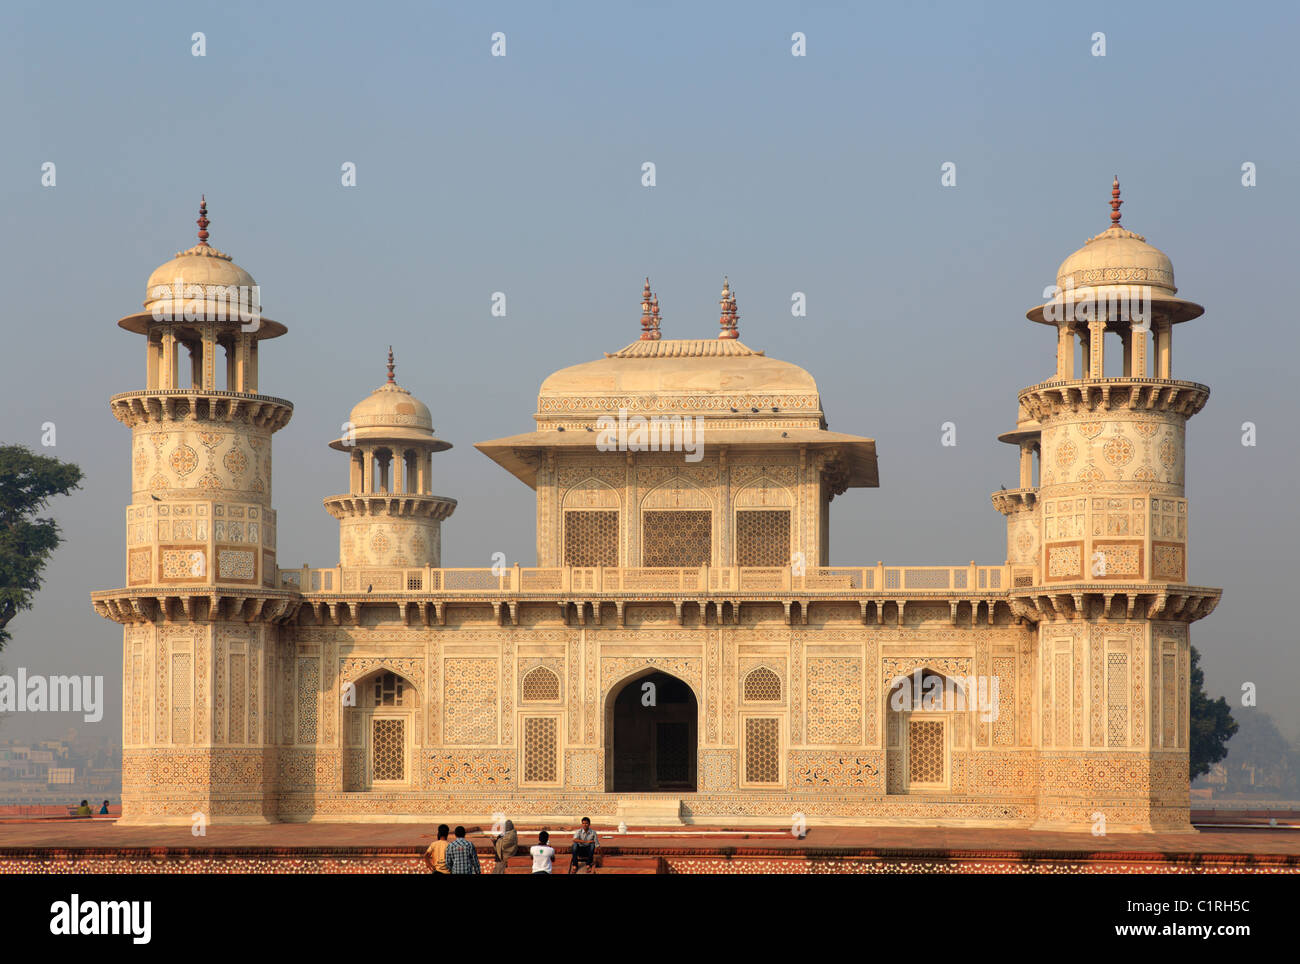 Itmad-Ud-Daulah's Tomb, also known as Baby Taj Mahal, Agra, India Stock Photo